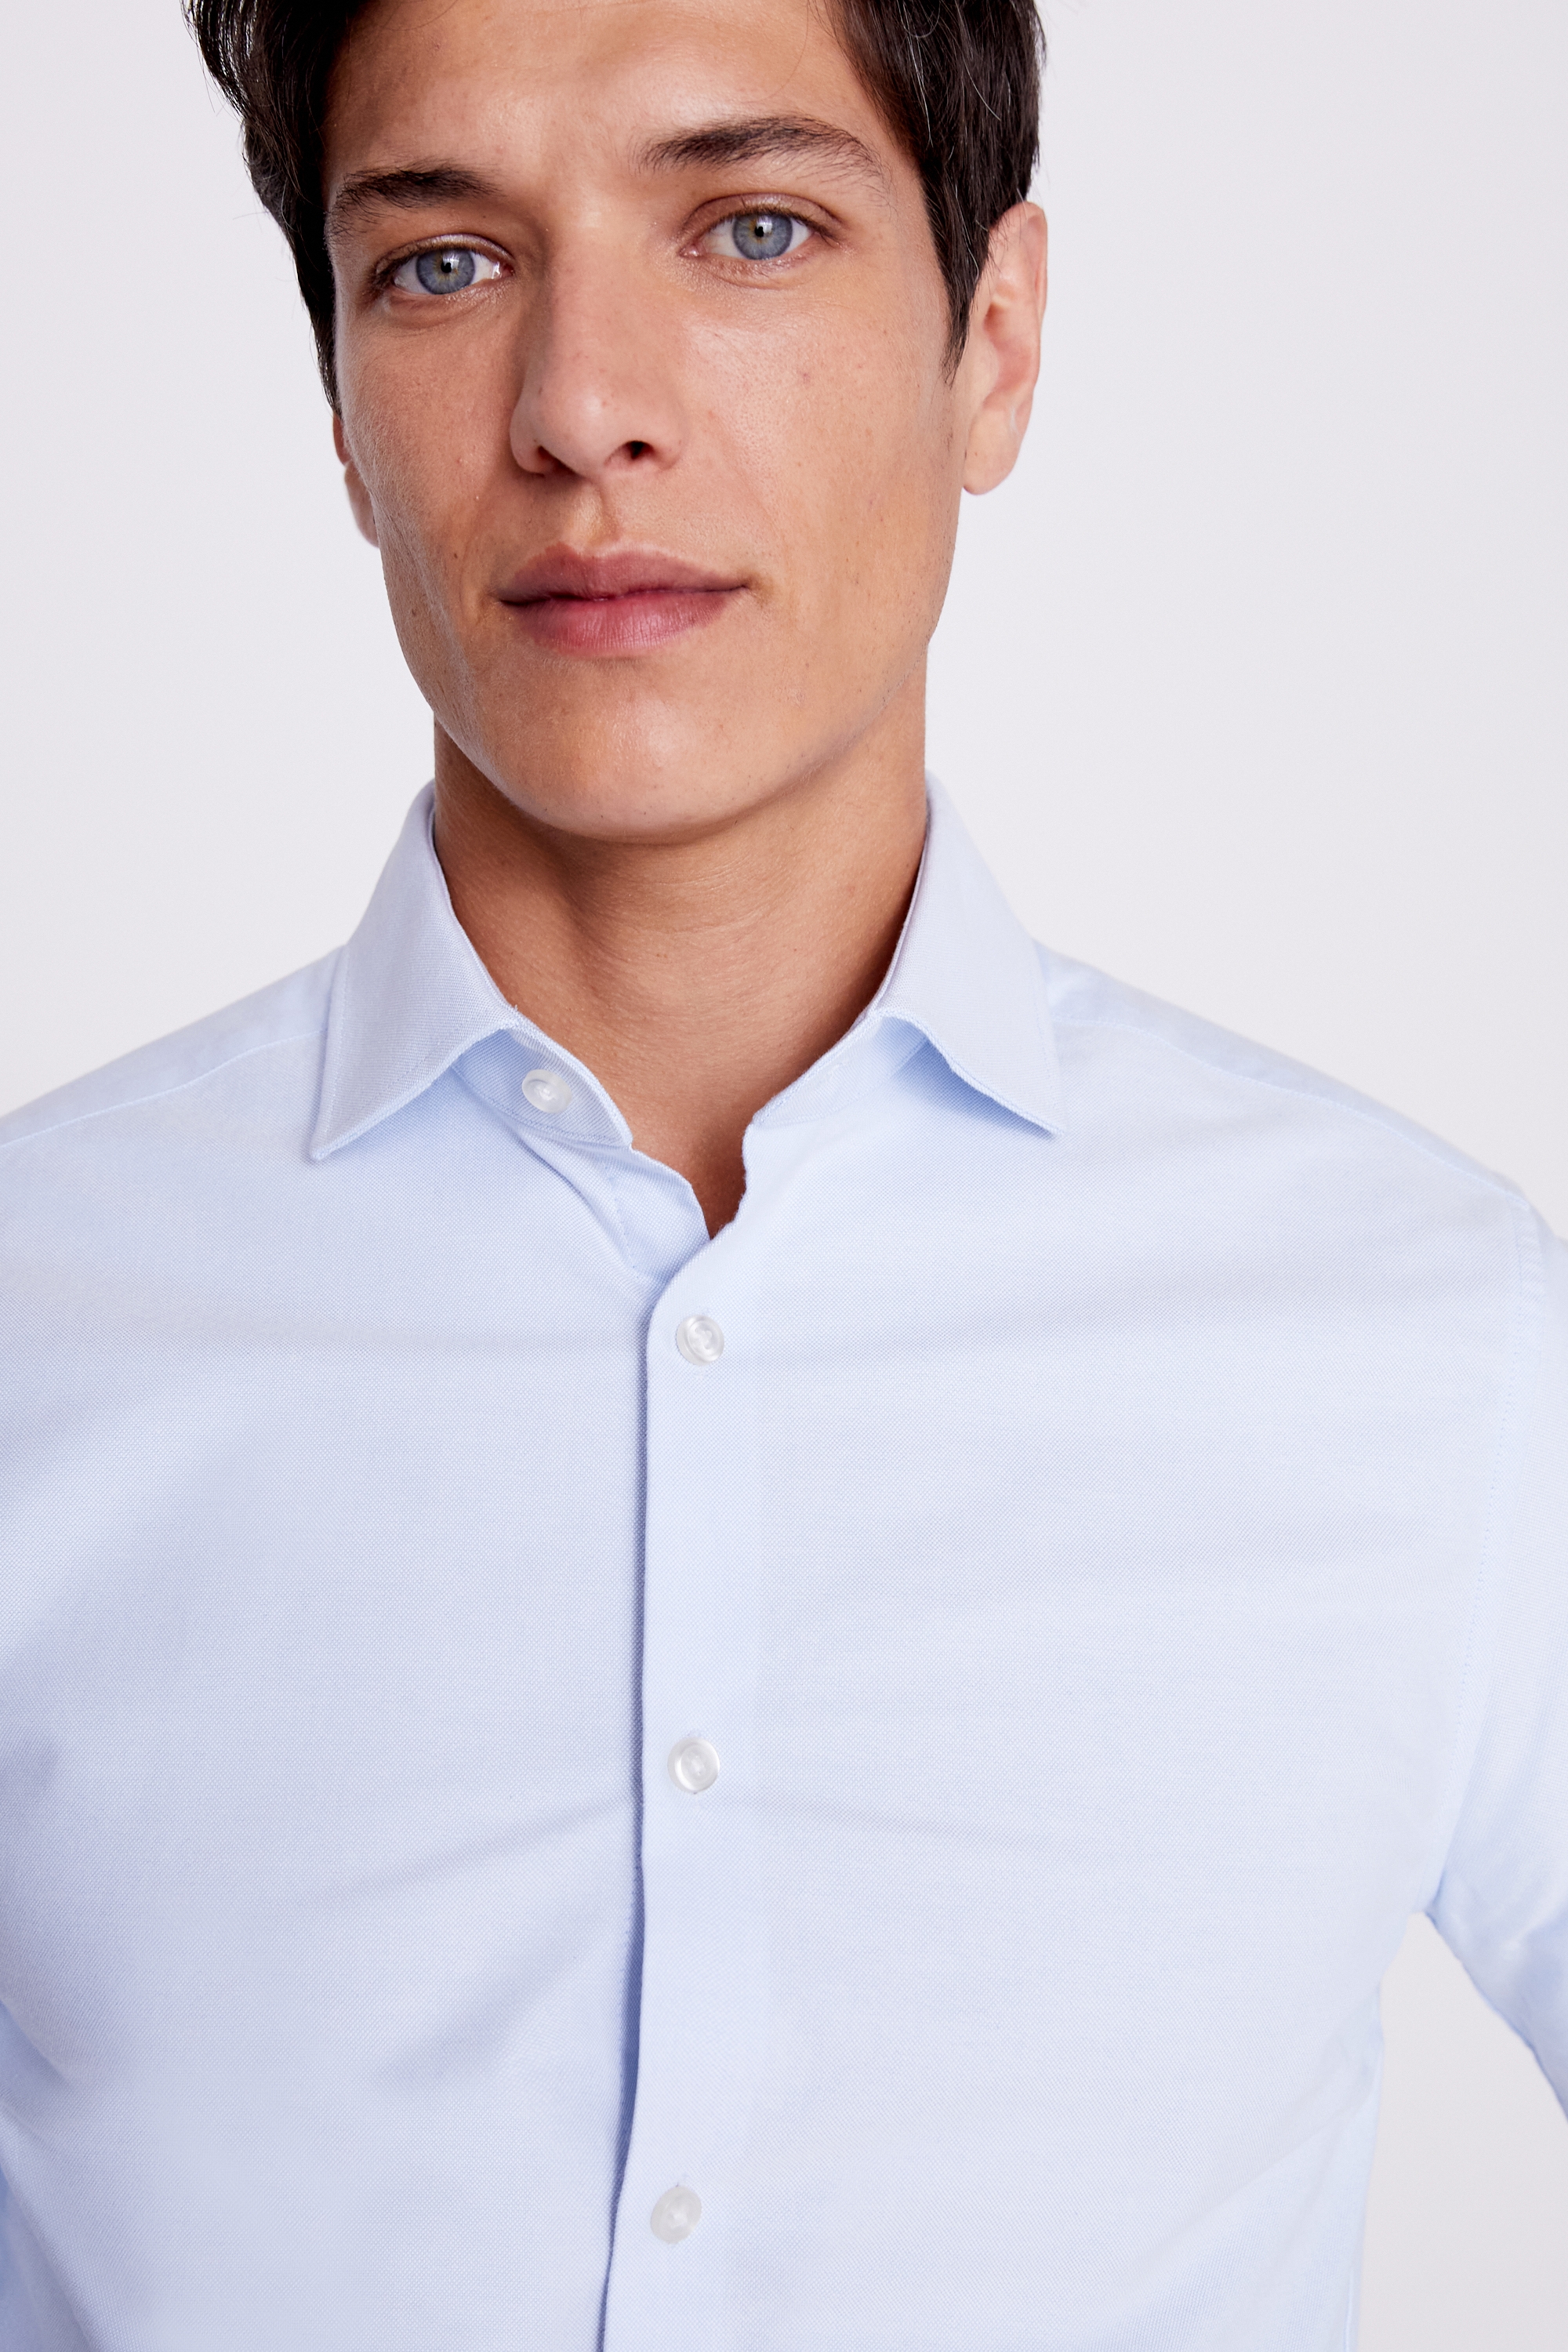 Slim Fit Sky Oxford Shirt | Buy Online at Moss